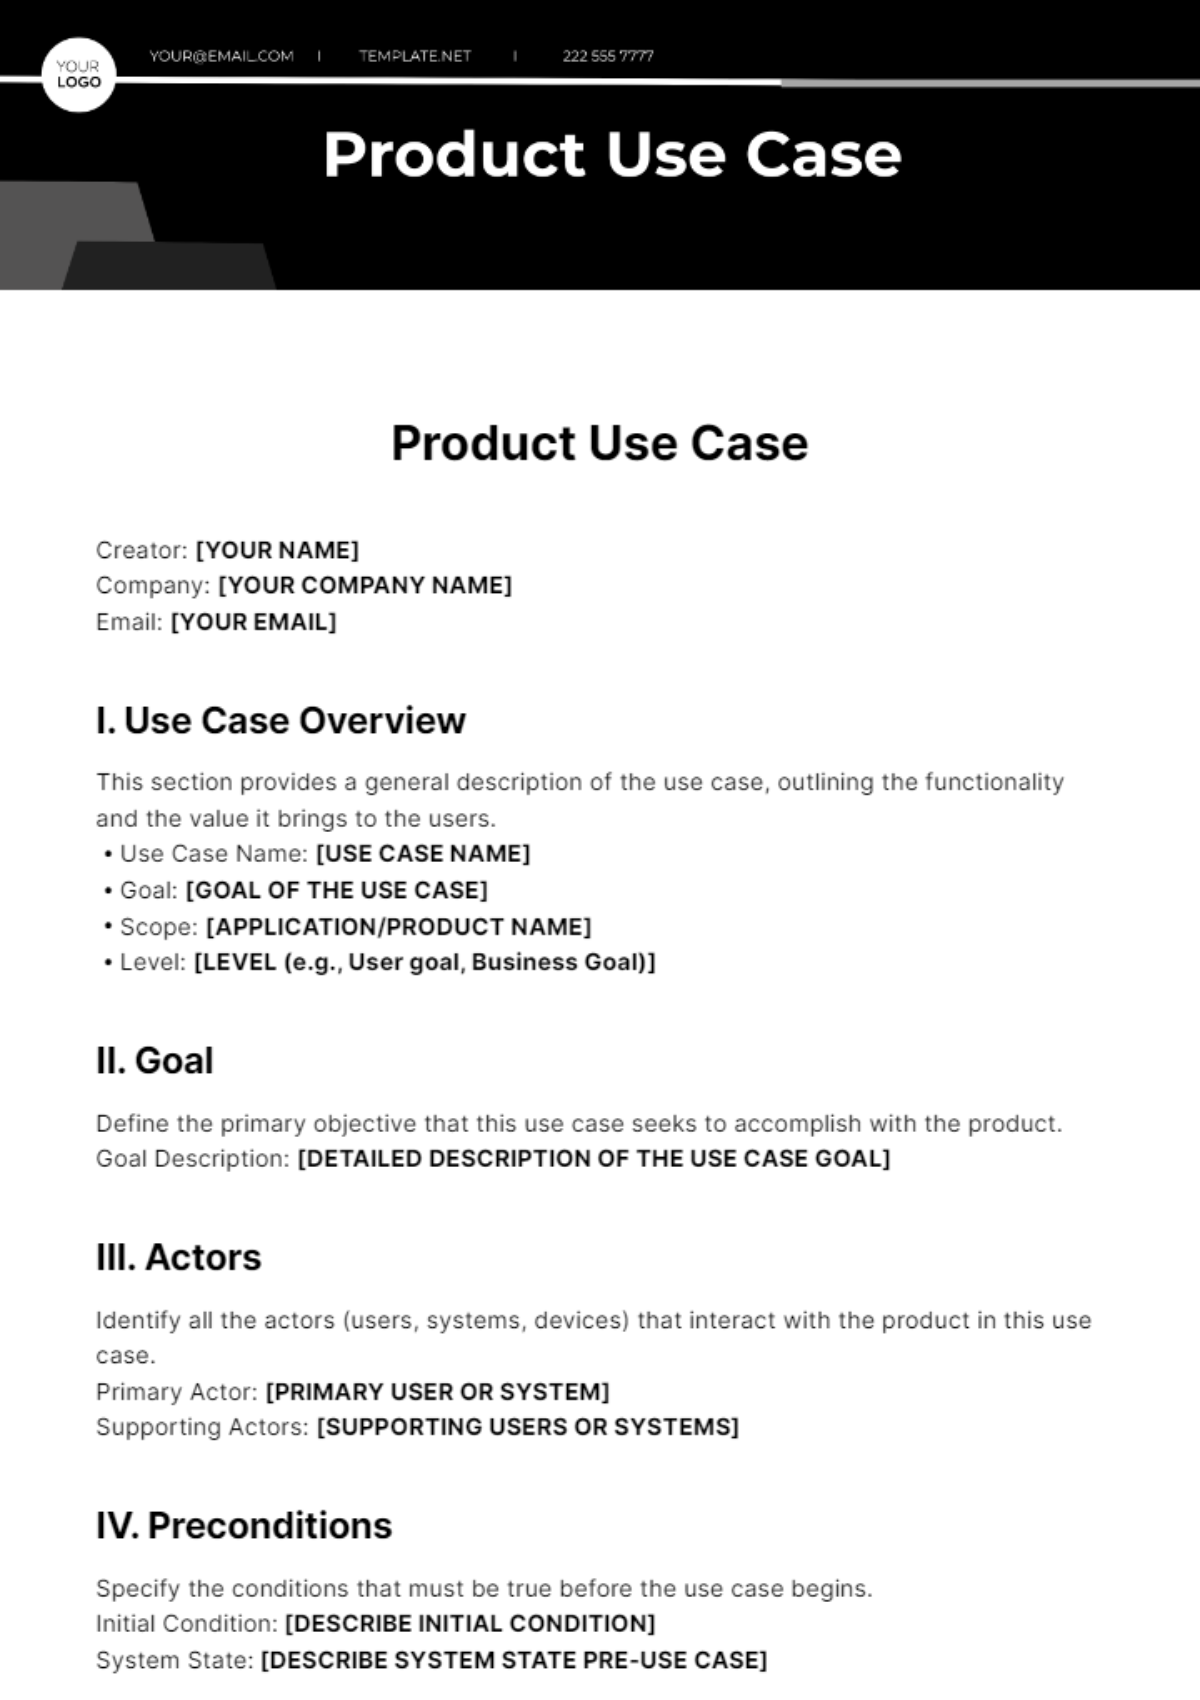 Product Use Case Template